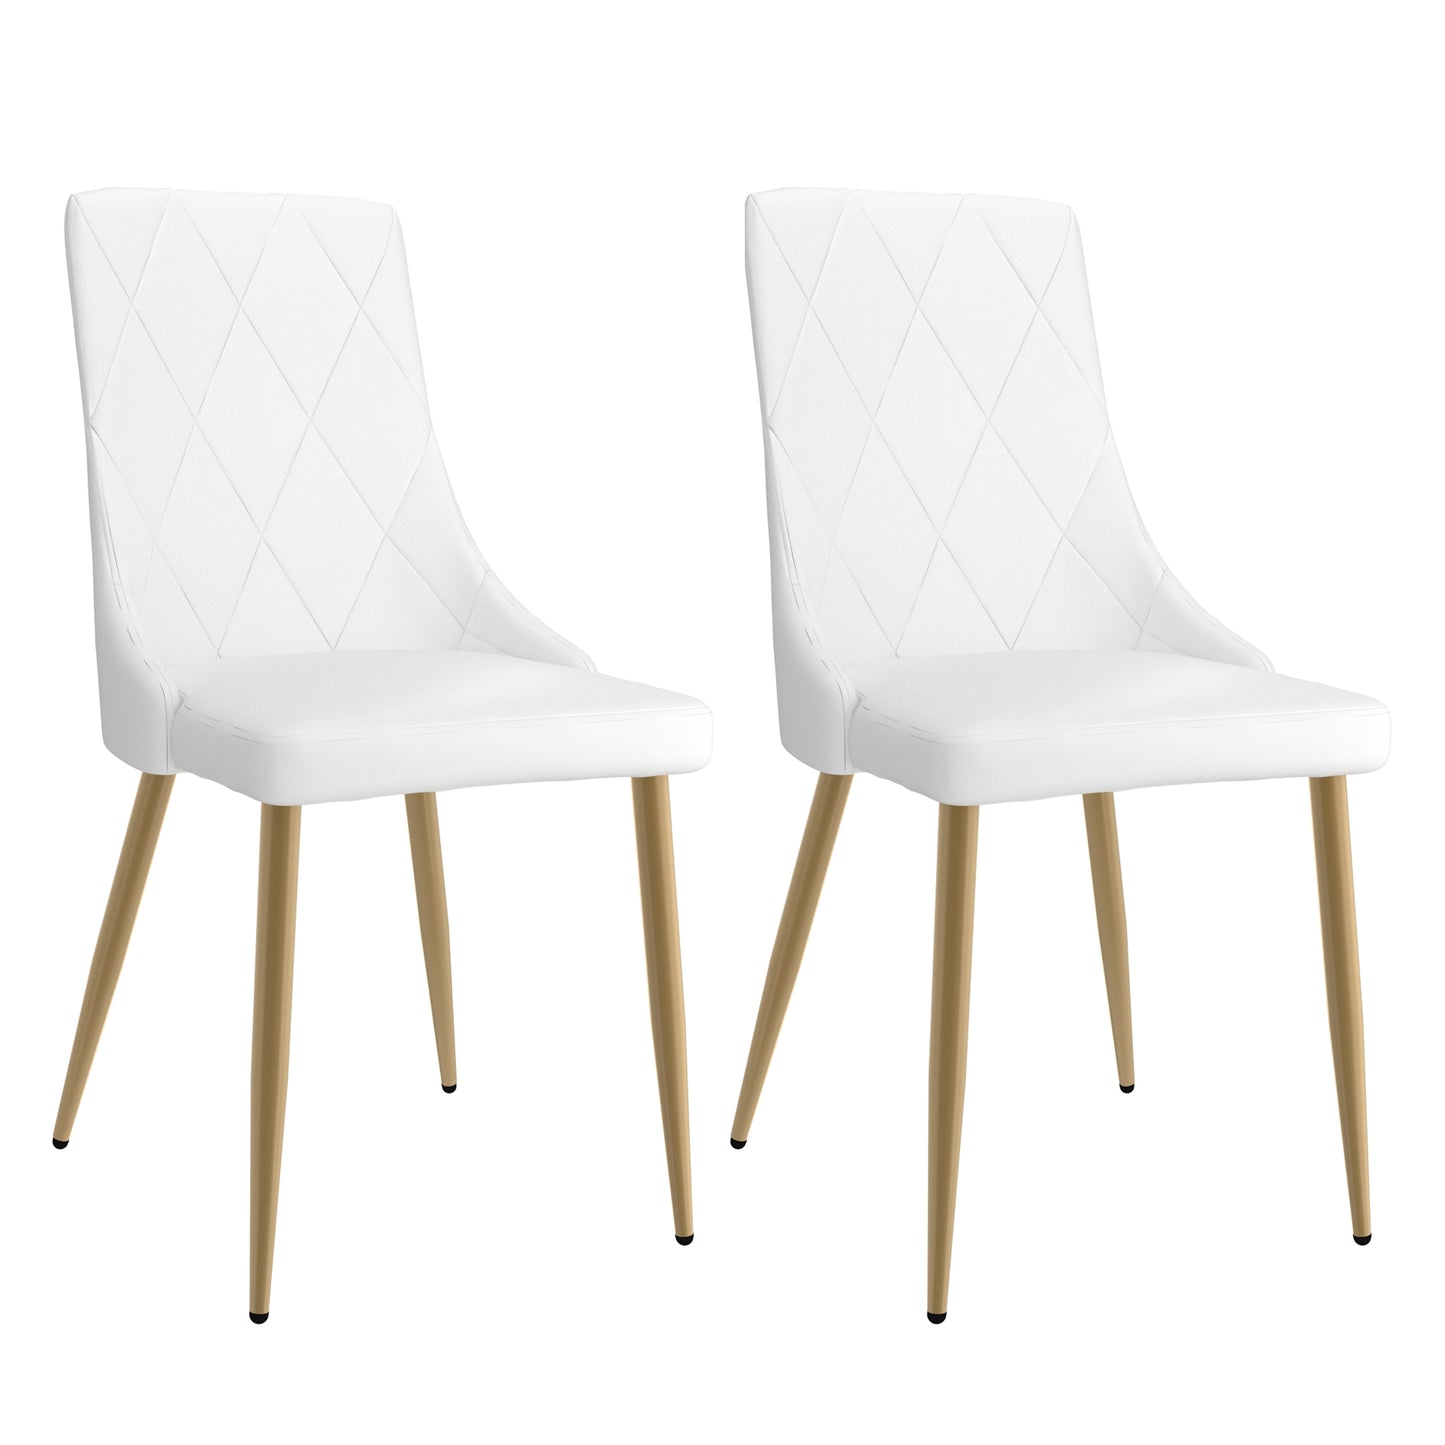 Antoine Side Chair, Set of 2 in White and Aged Gold